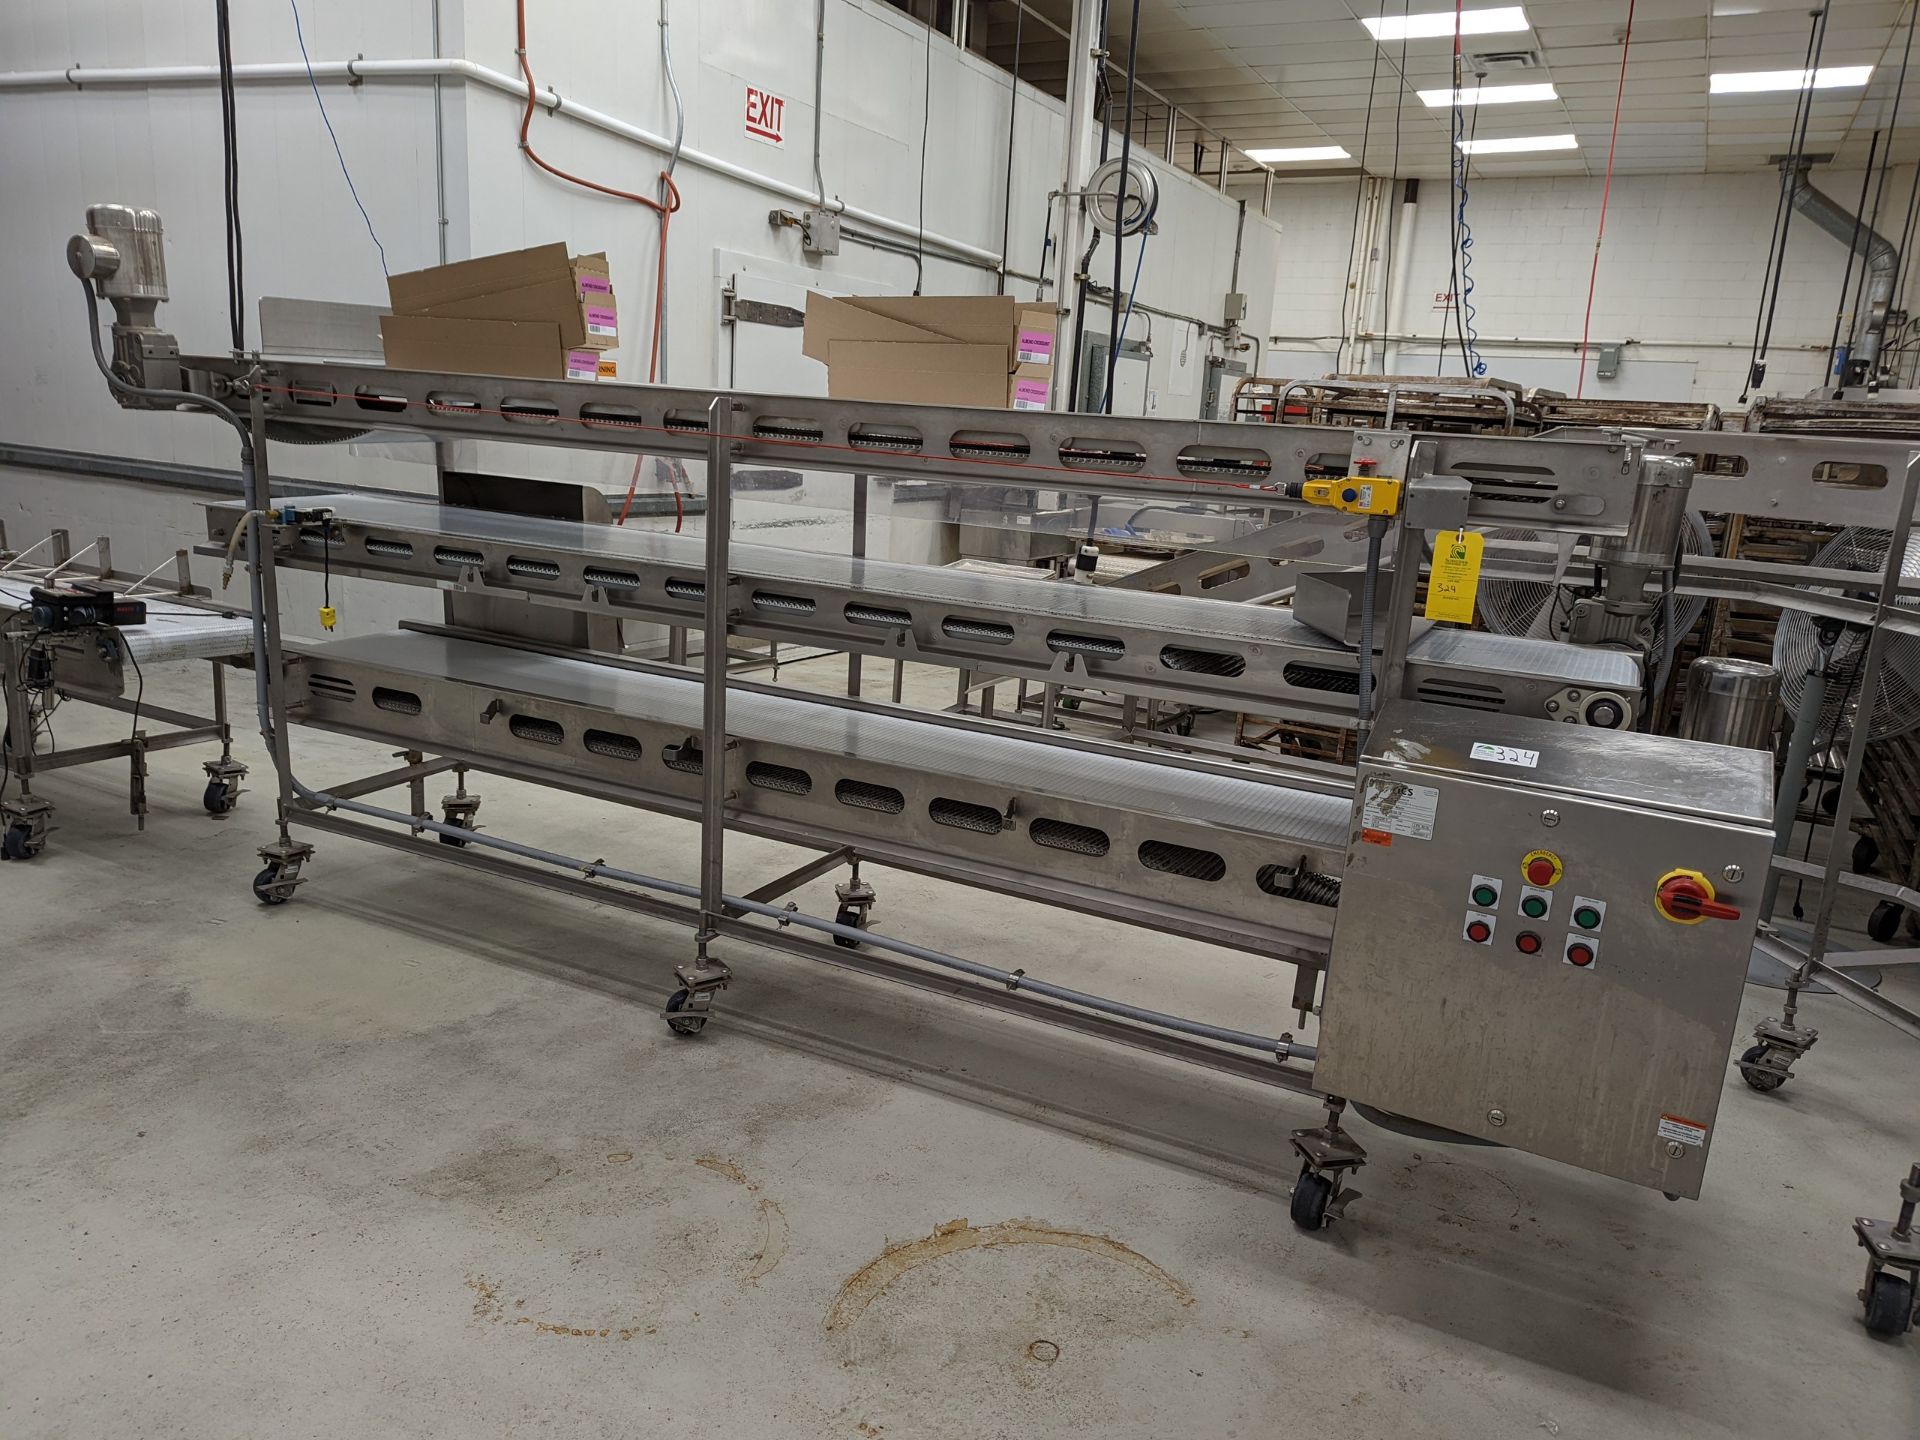 3 Level Packing Conveyor, each section approx 10ft long, 18in wide belt